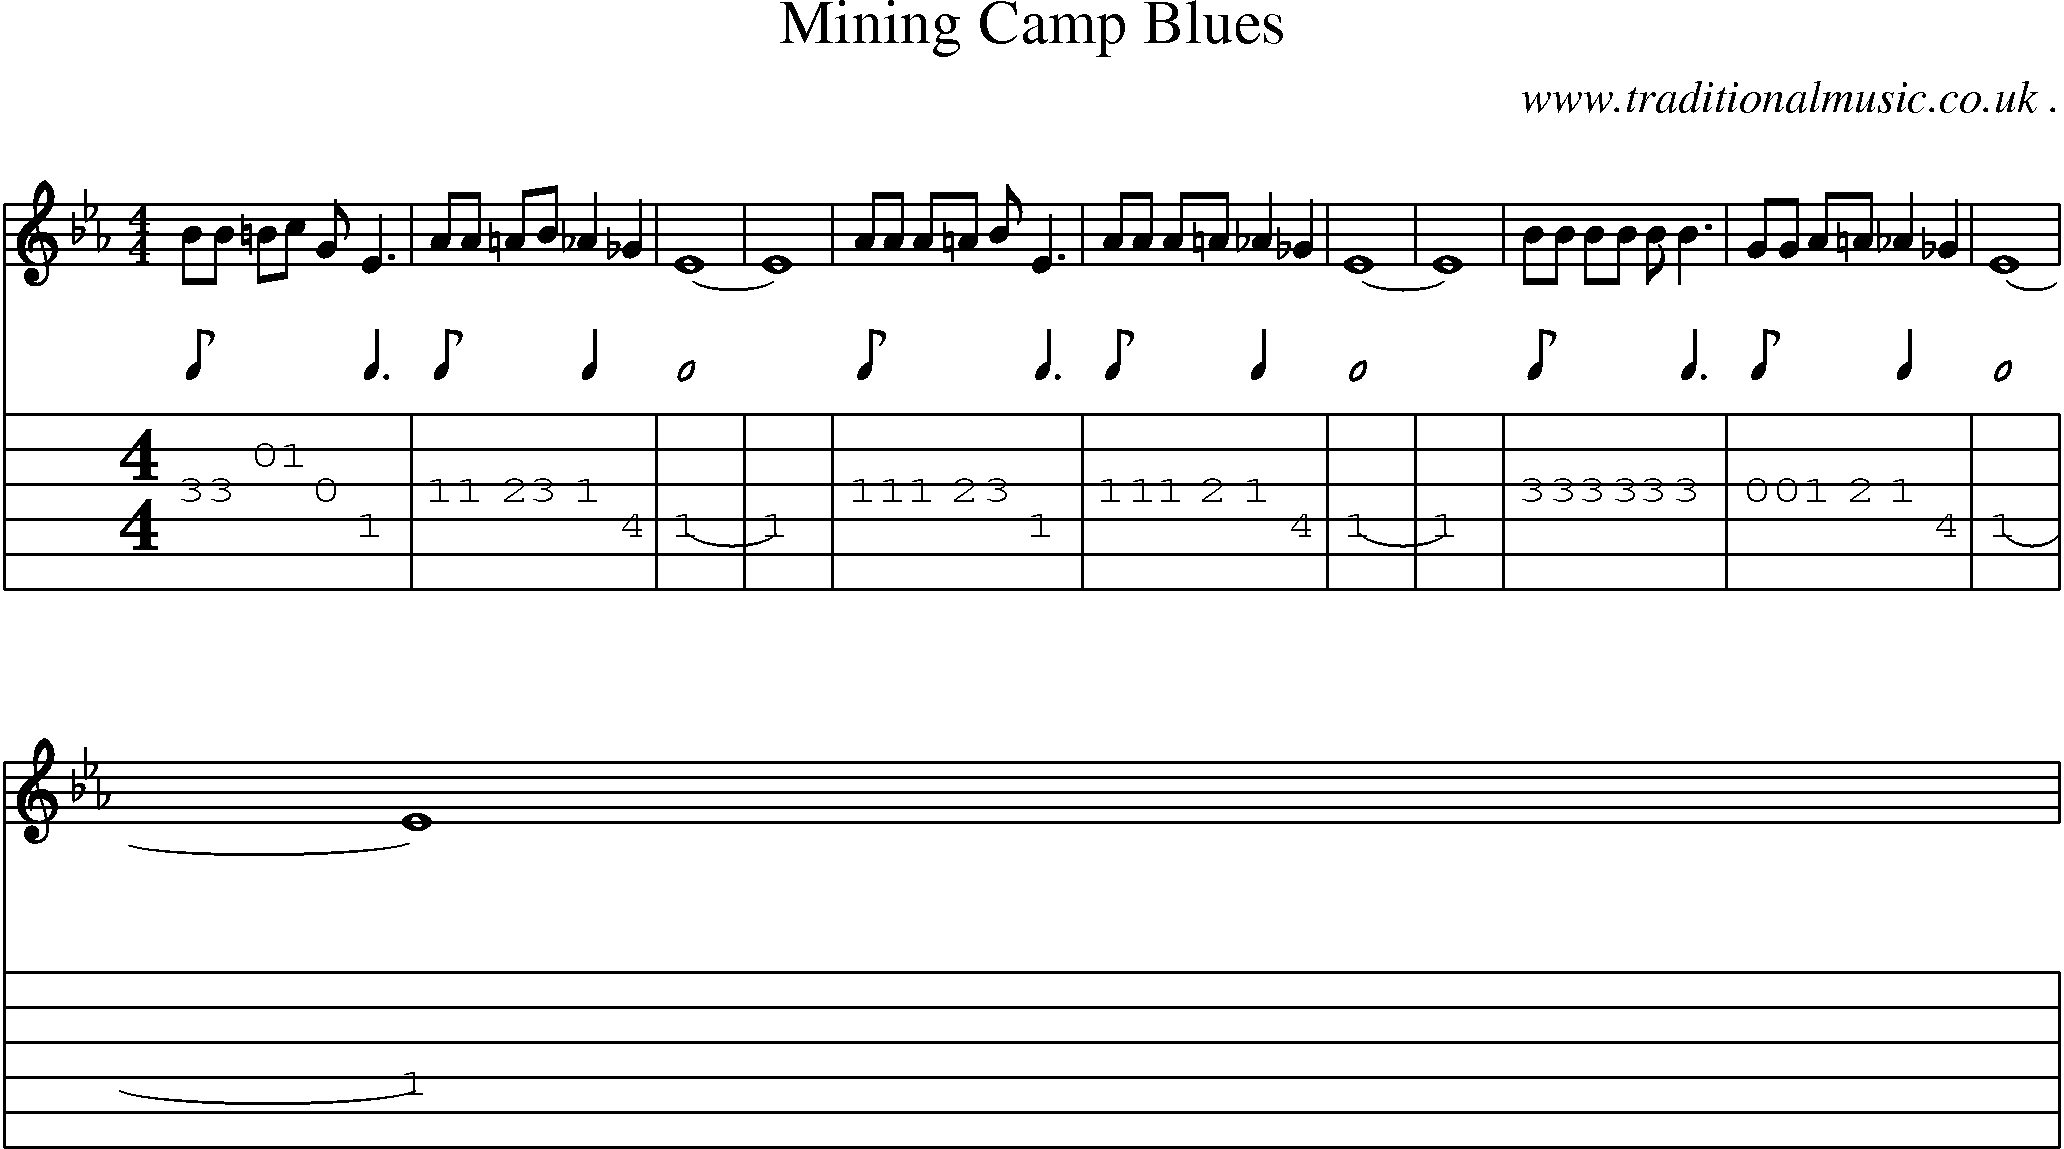 Music Score and Guitar Tabs for Mining Camp Blues